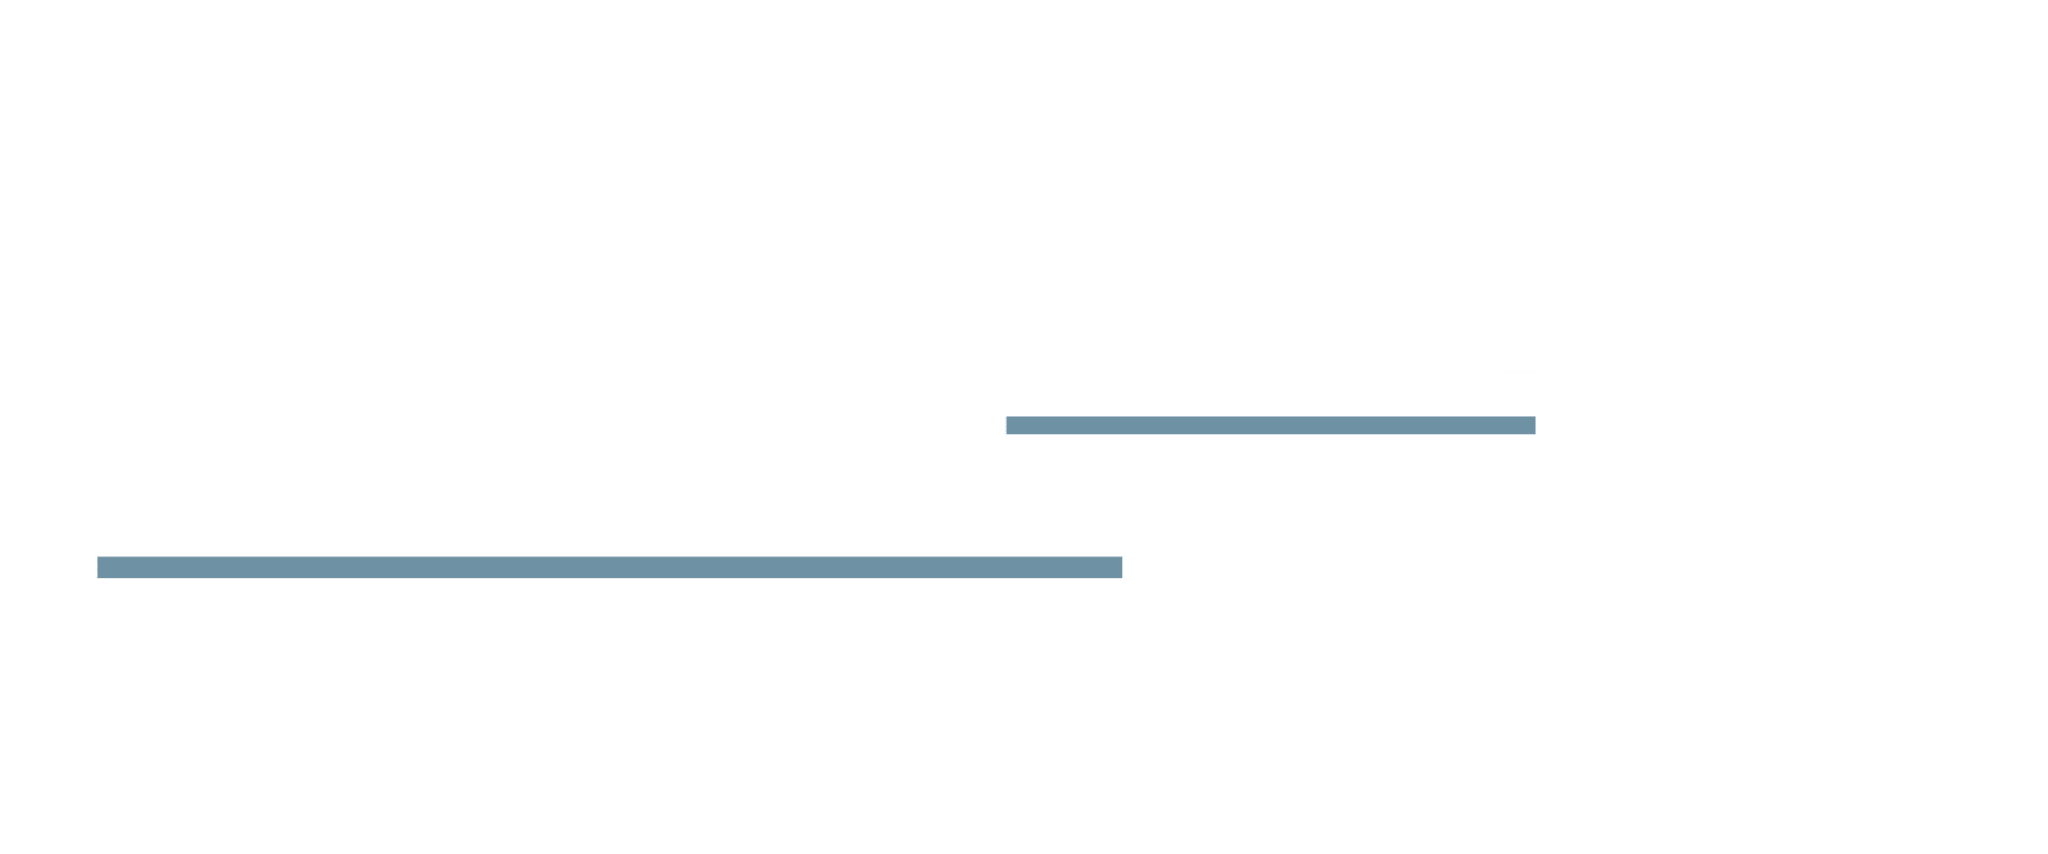 A school girls love Traditional values you can trust 1